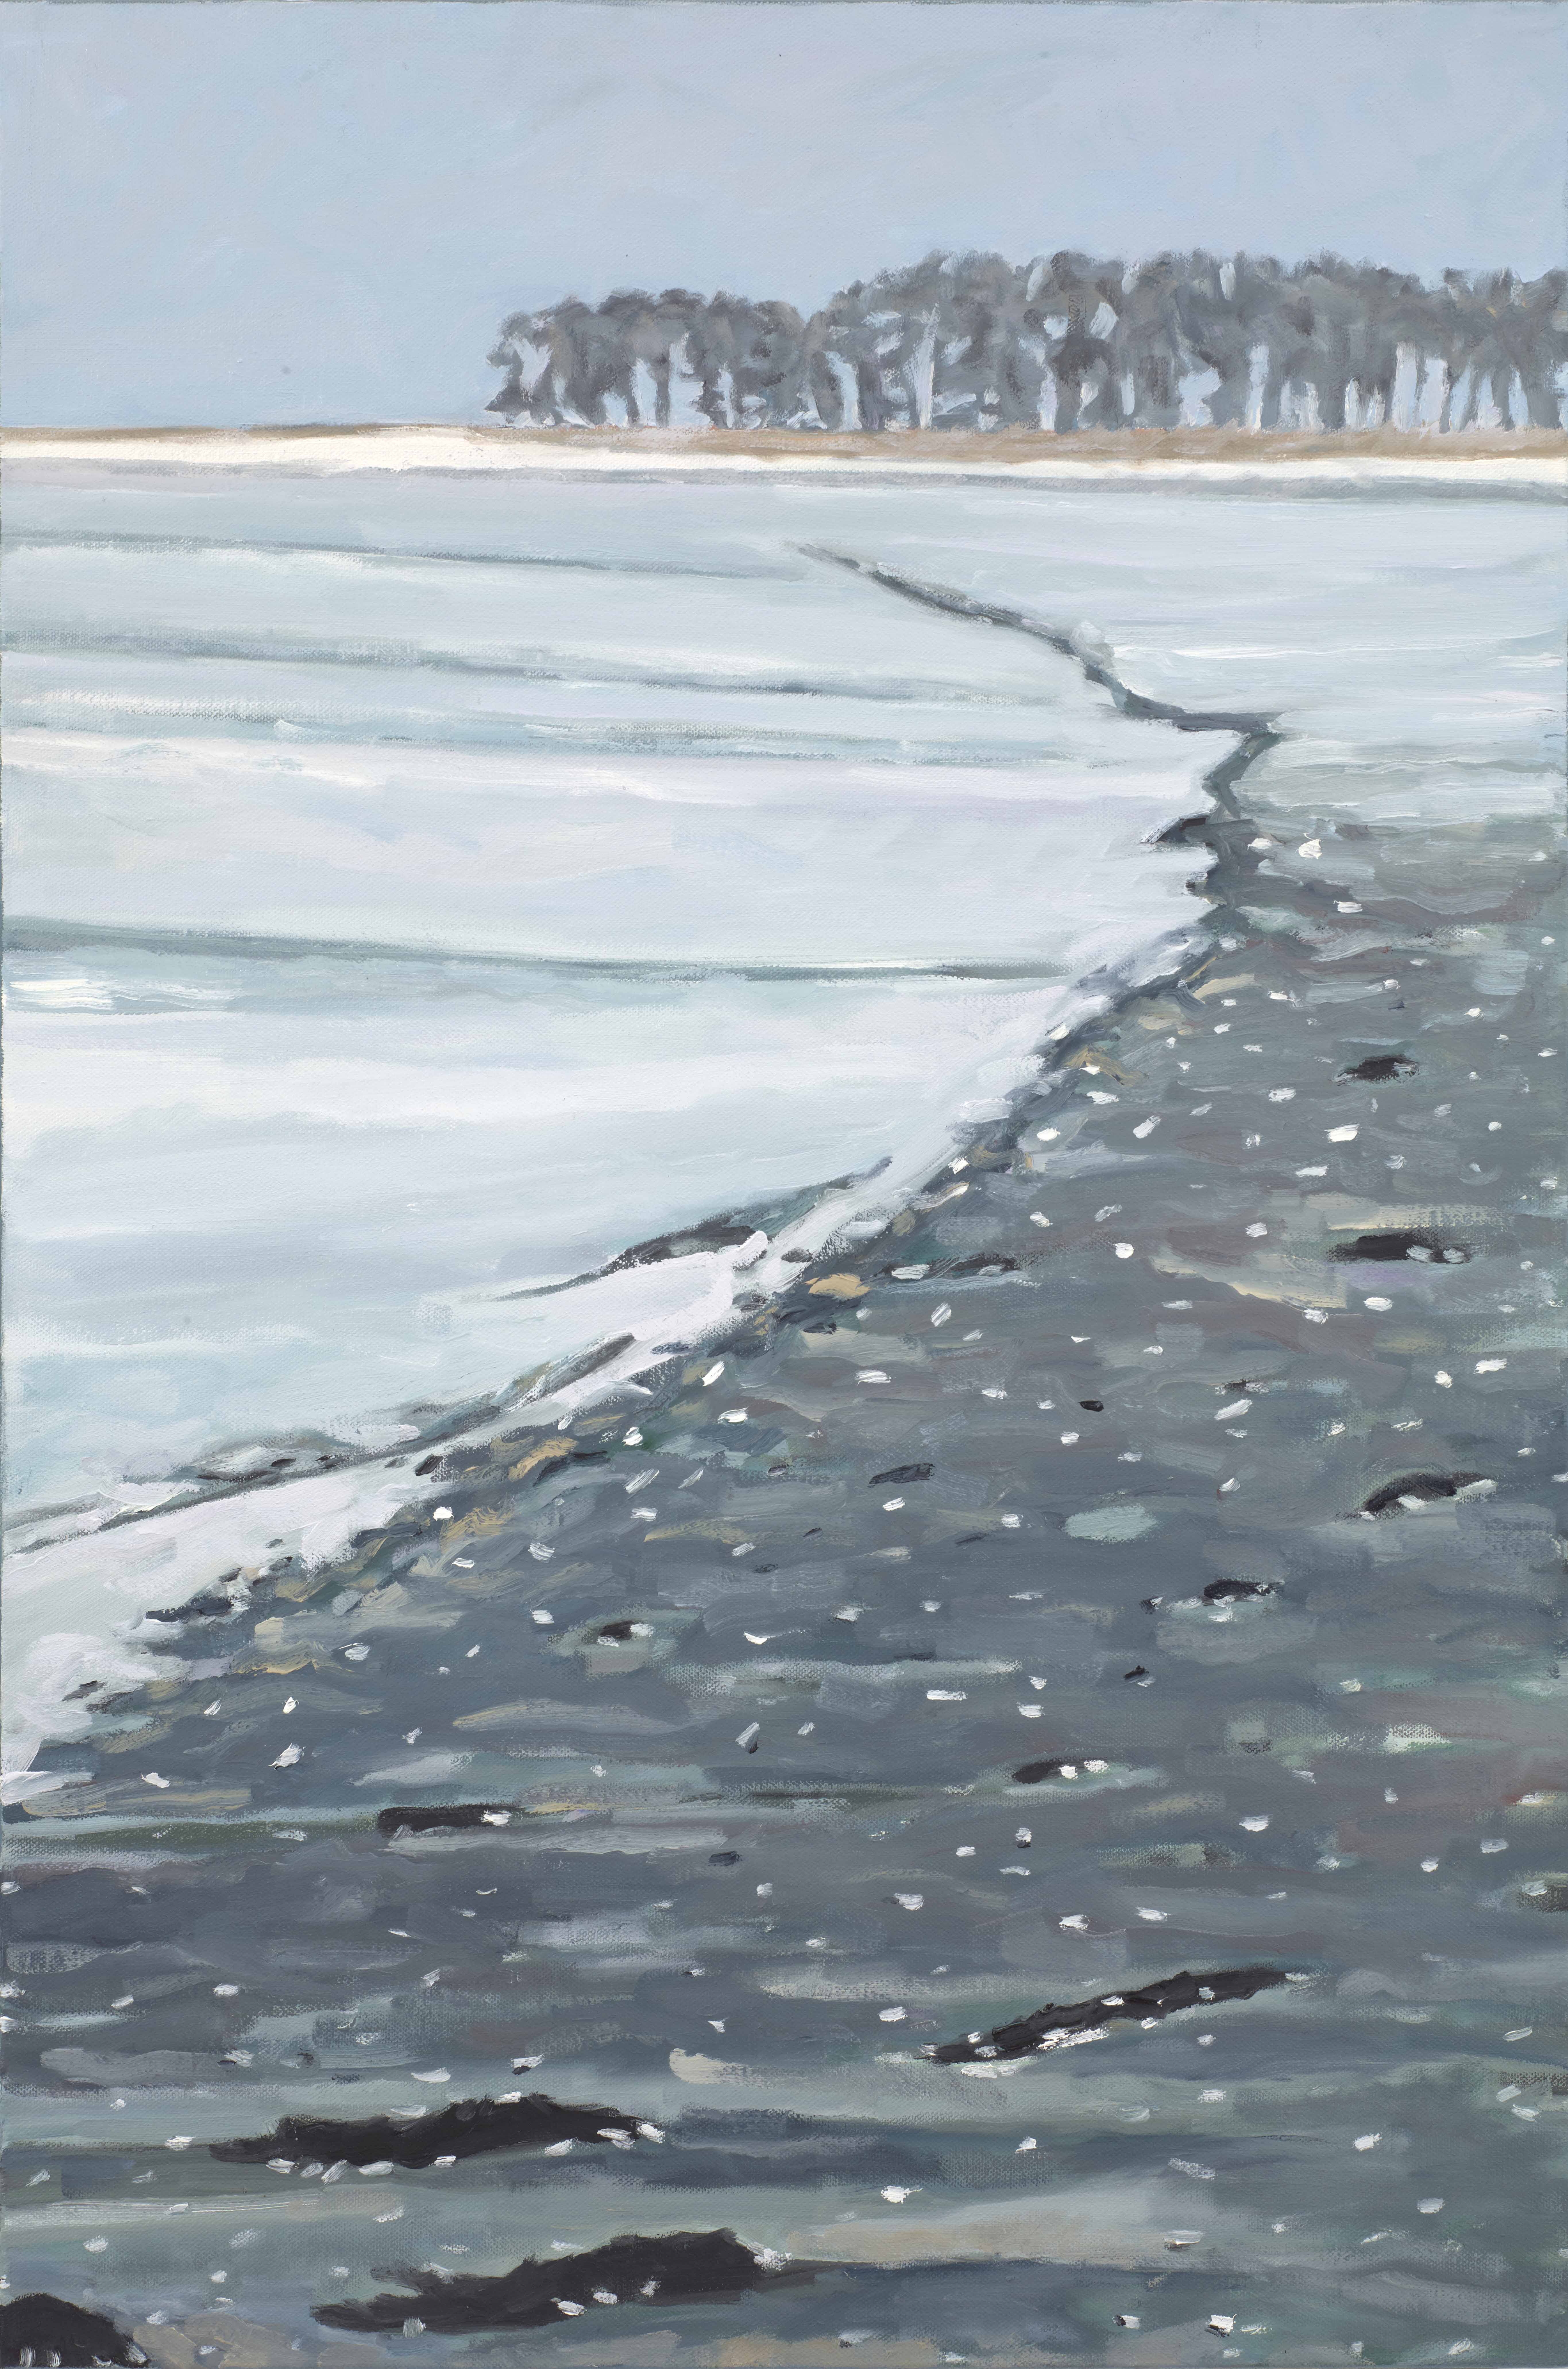 The Clam Flats, 2019, oil on canvas, 30 x 20 inches